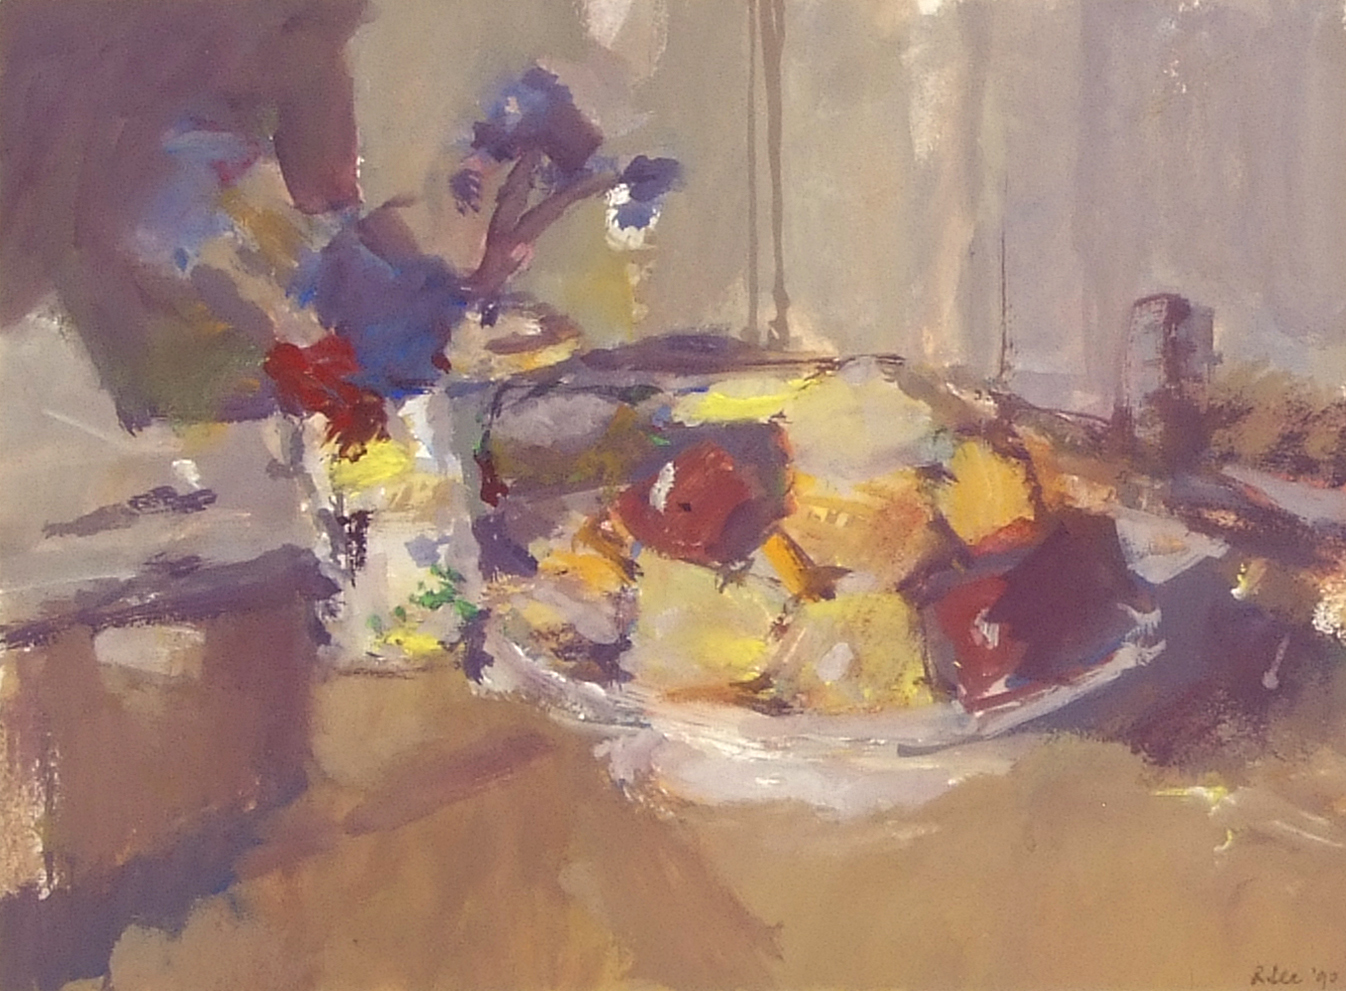 Dick Lee (1923-2001), "Cornflowers and apples", watercolour, signed, dated 90 lower right, 22 x